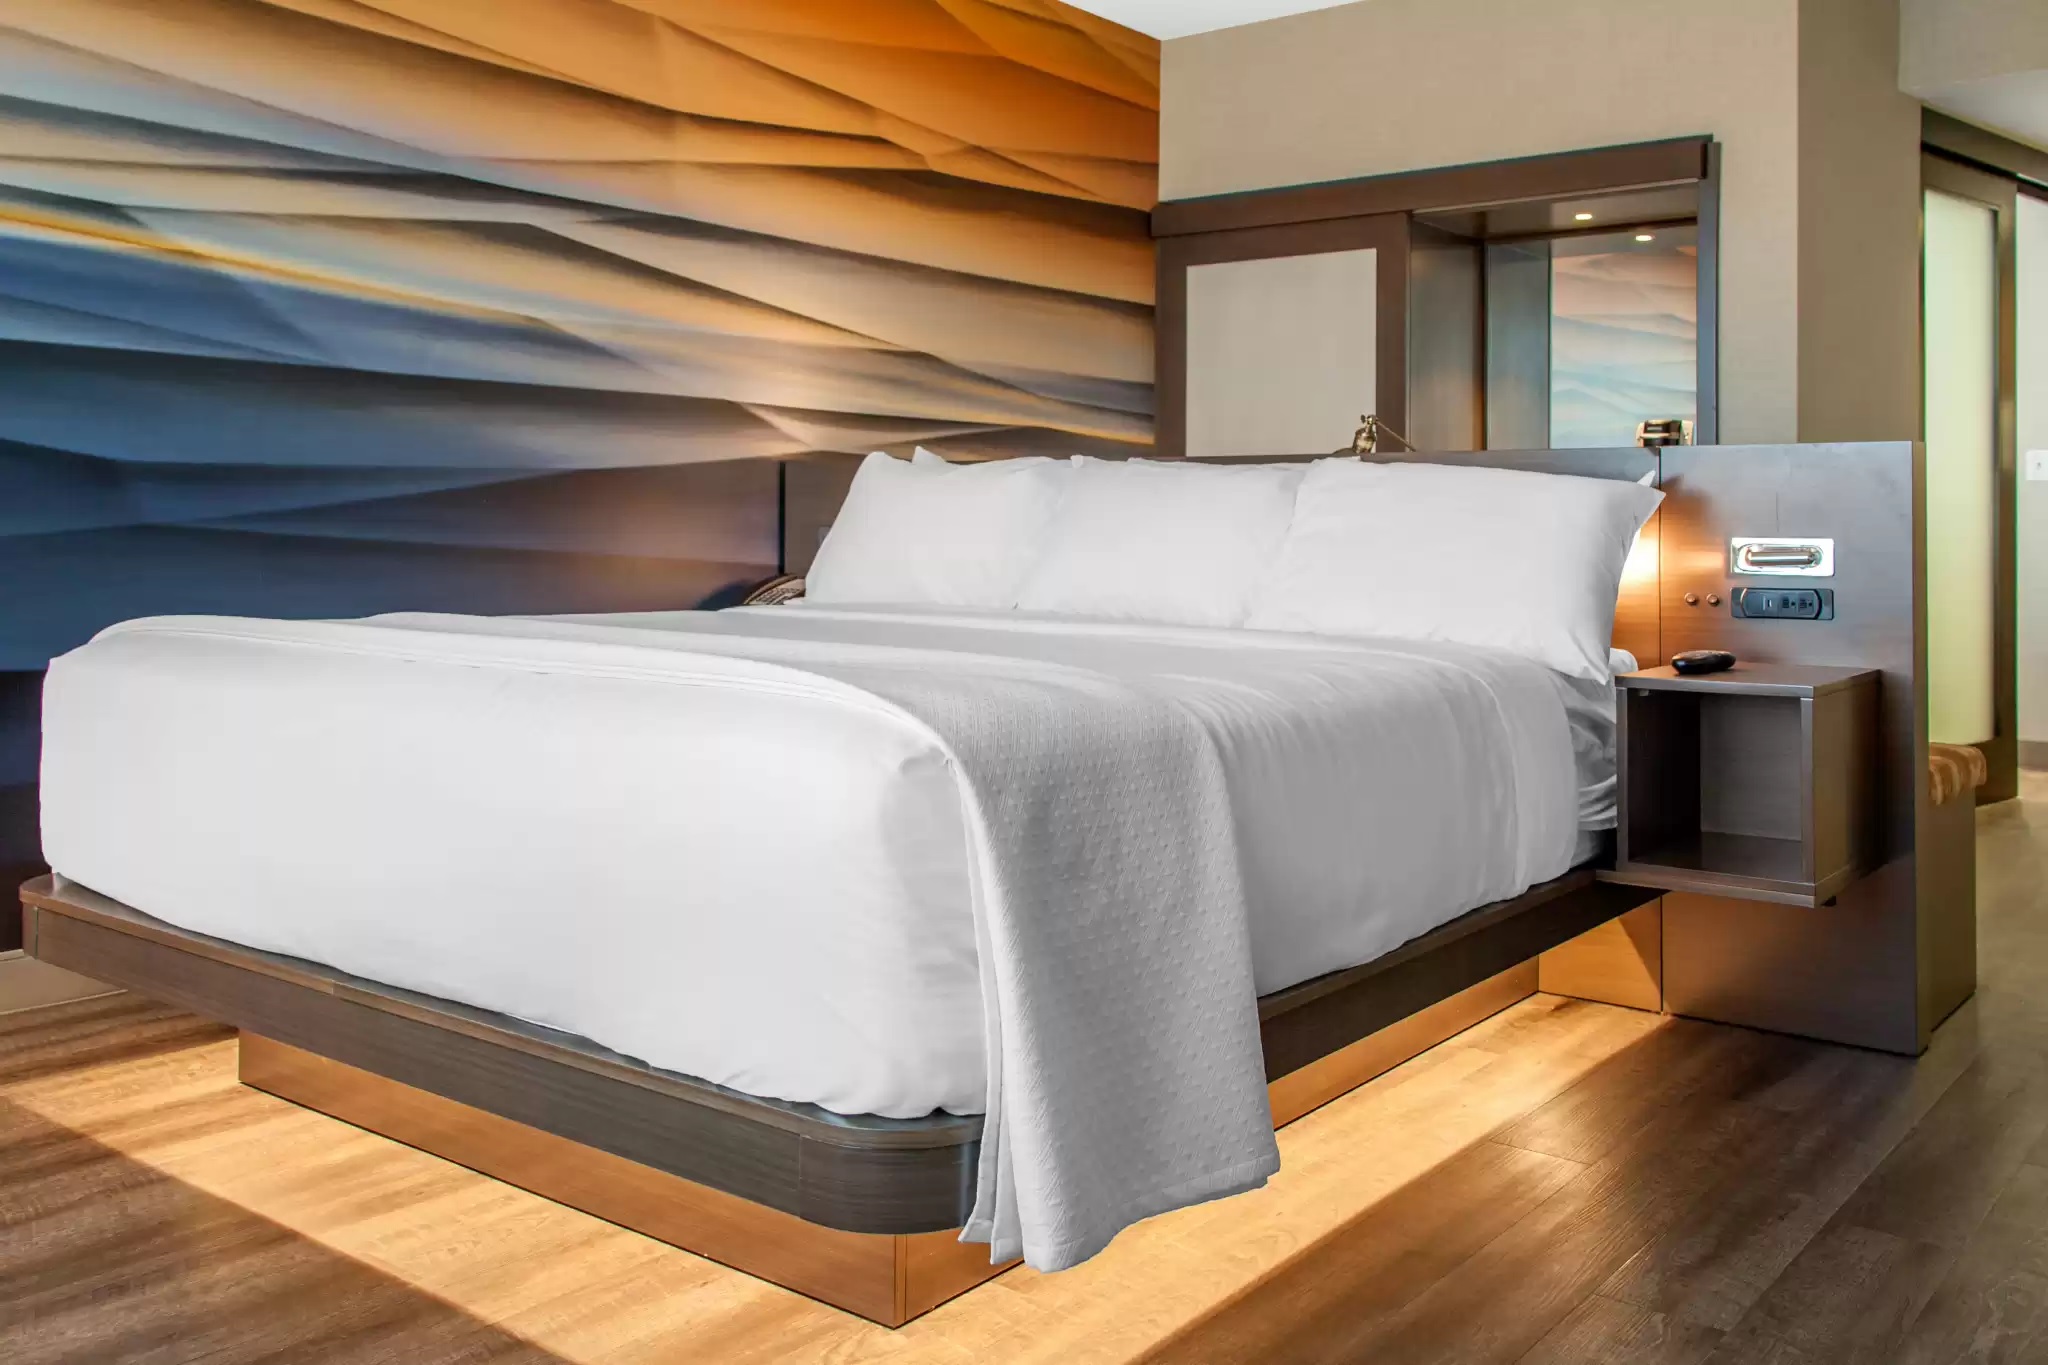 a bed with white sheets and a wood floor